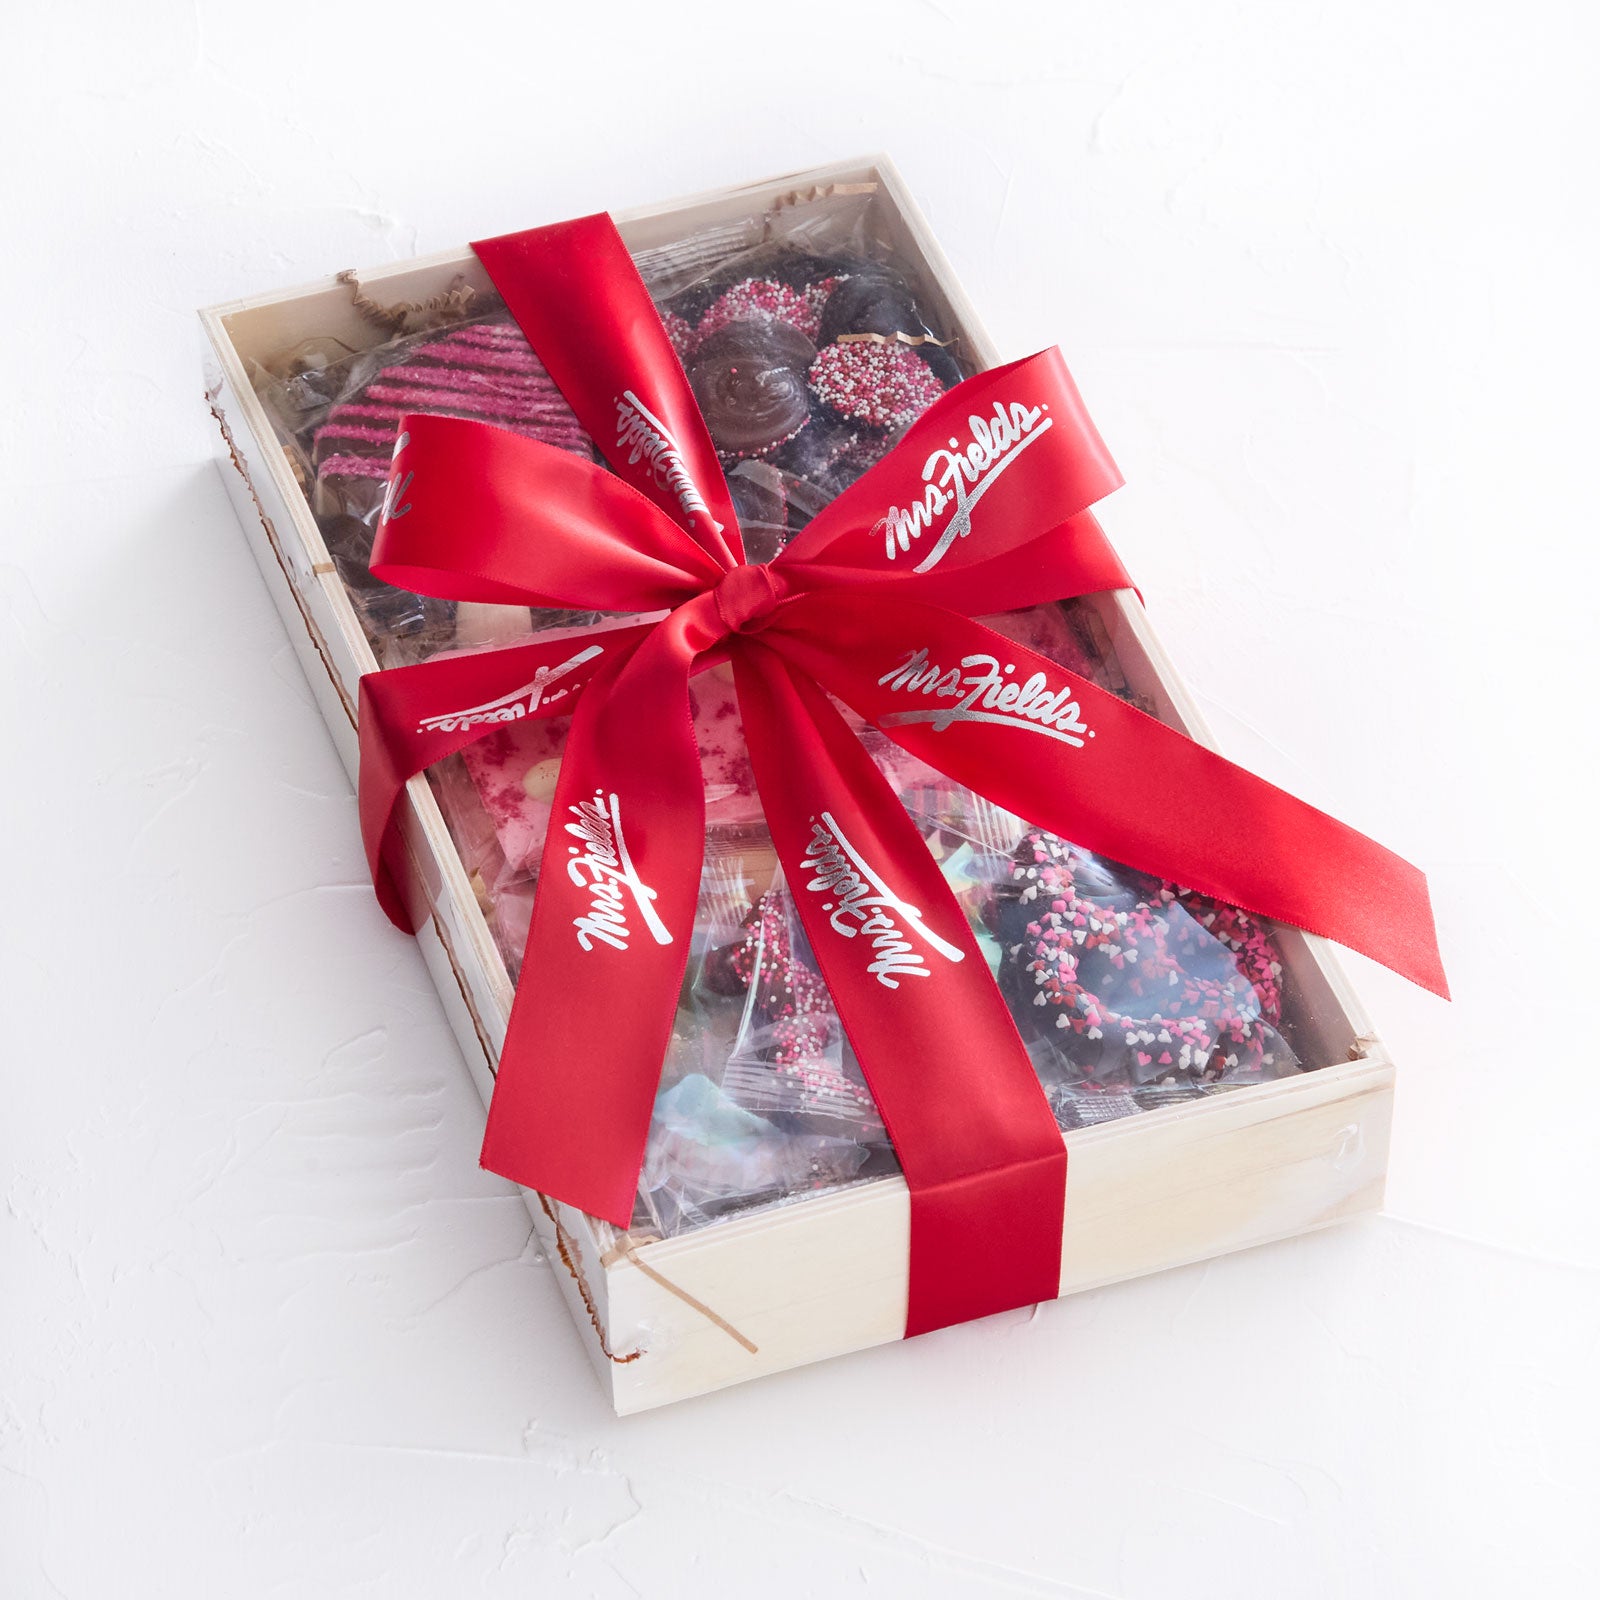 Valentine's Day themed chocolates and chocolate covered pretzels in a gift tray and tied with a red Mrs. Fields ribbon